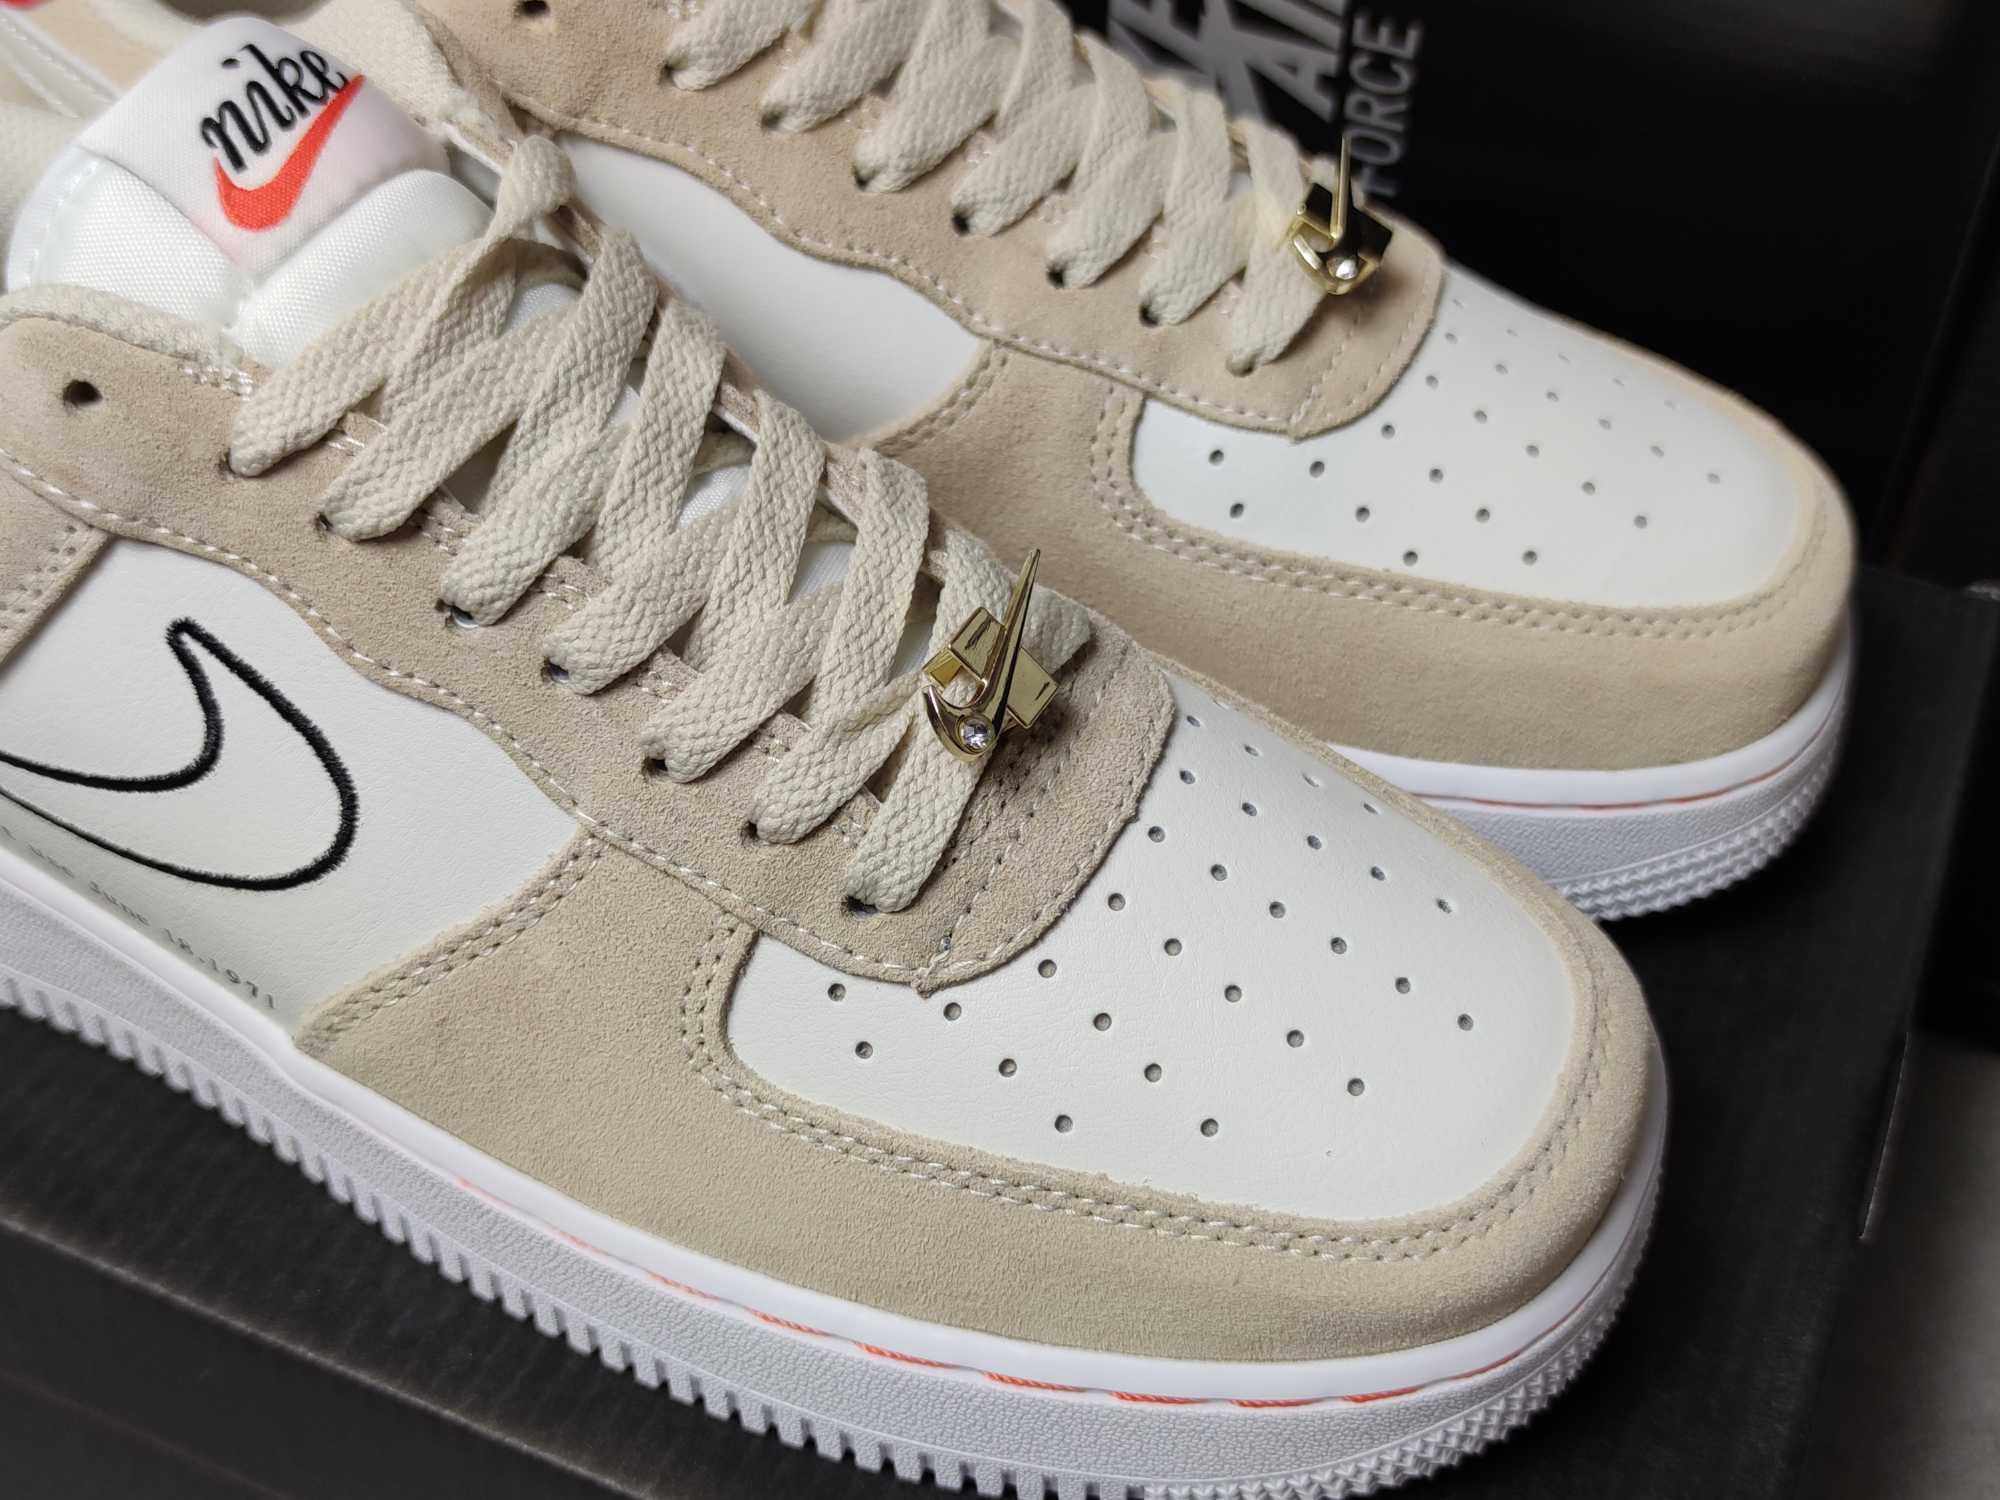 Nike Air Force 1 Low
First Use Light Sail Red